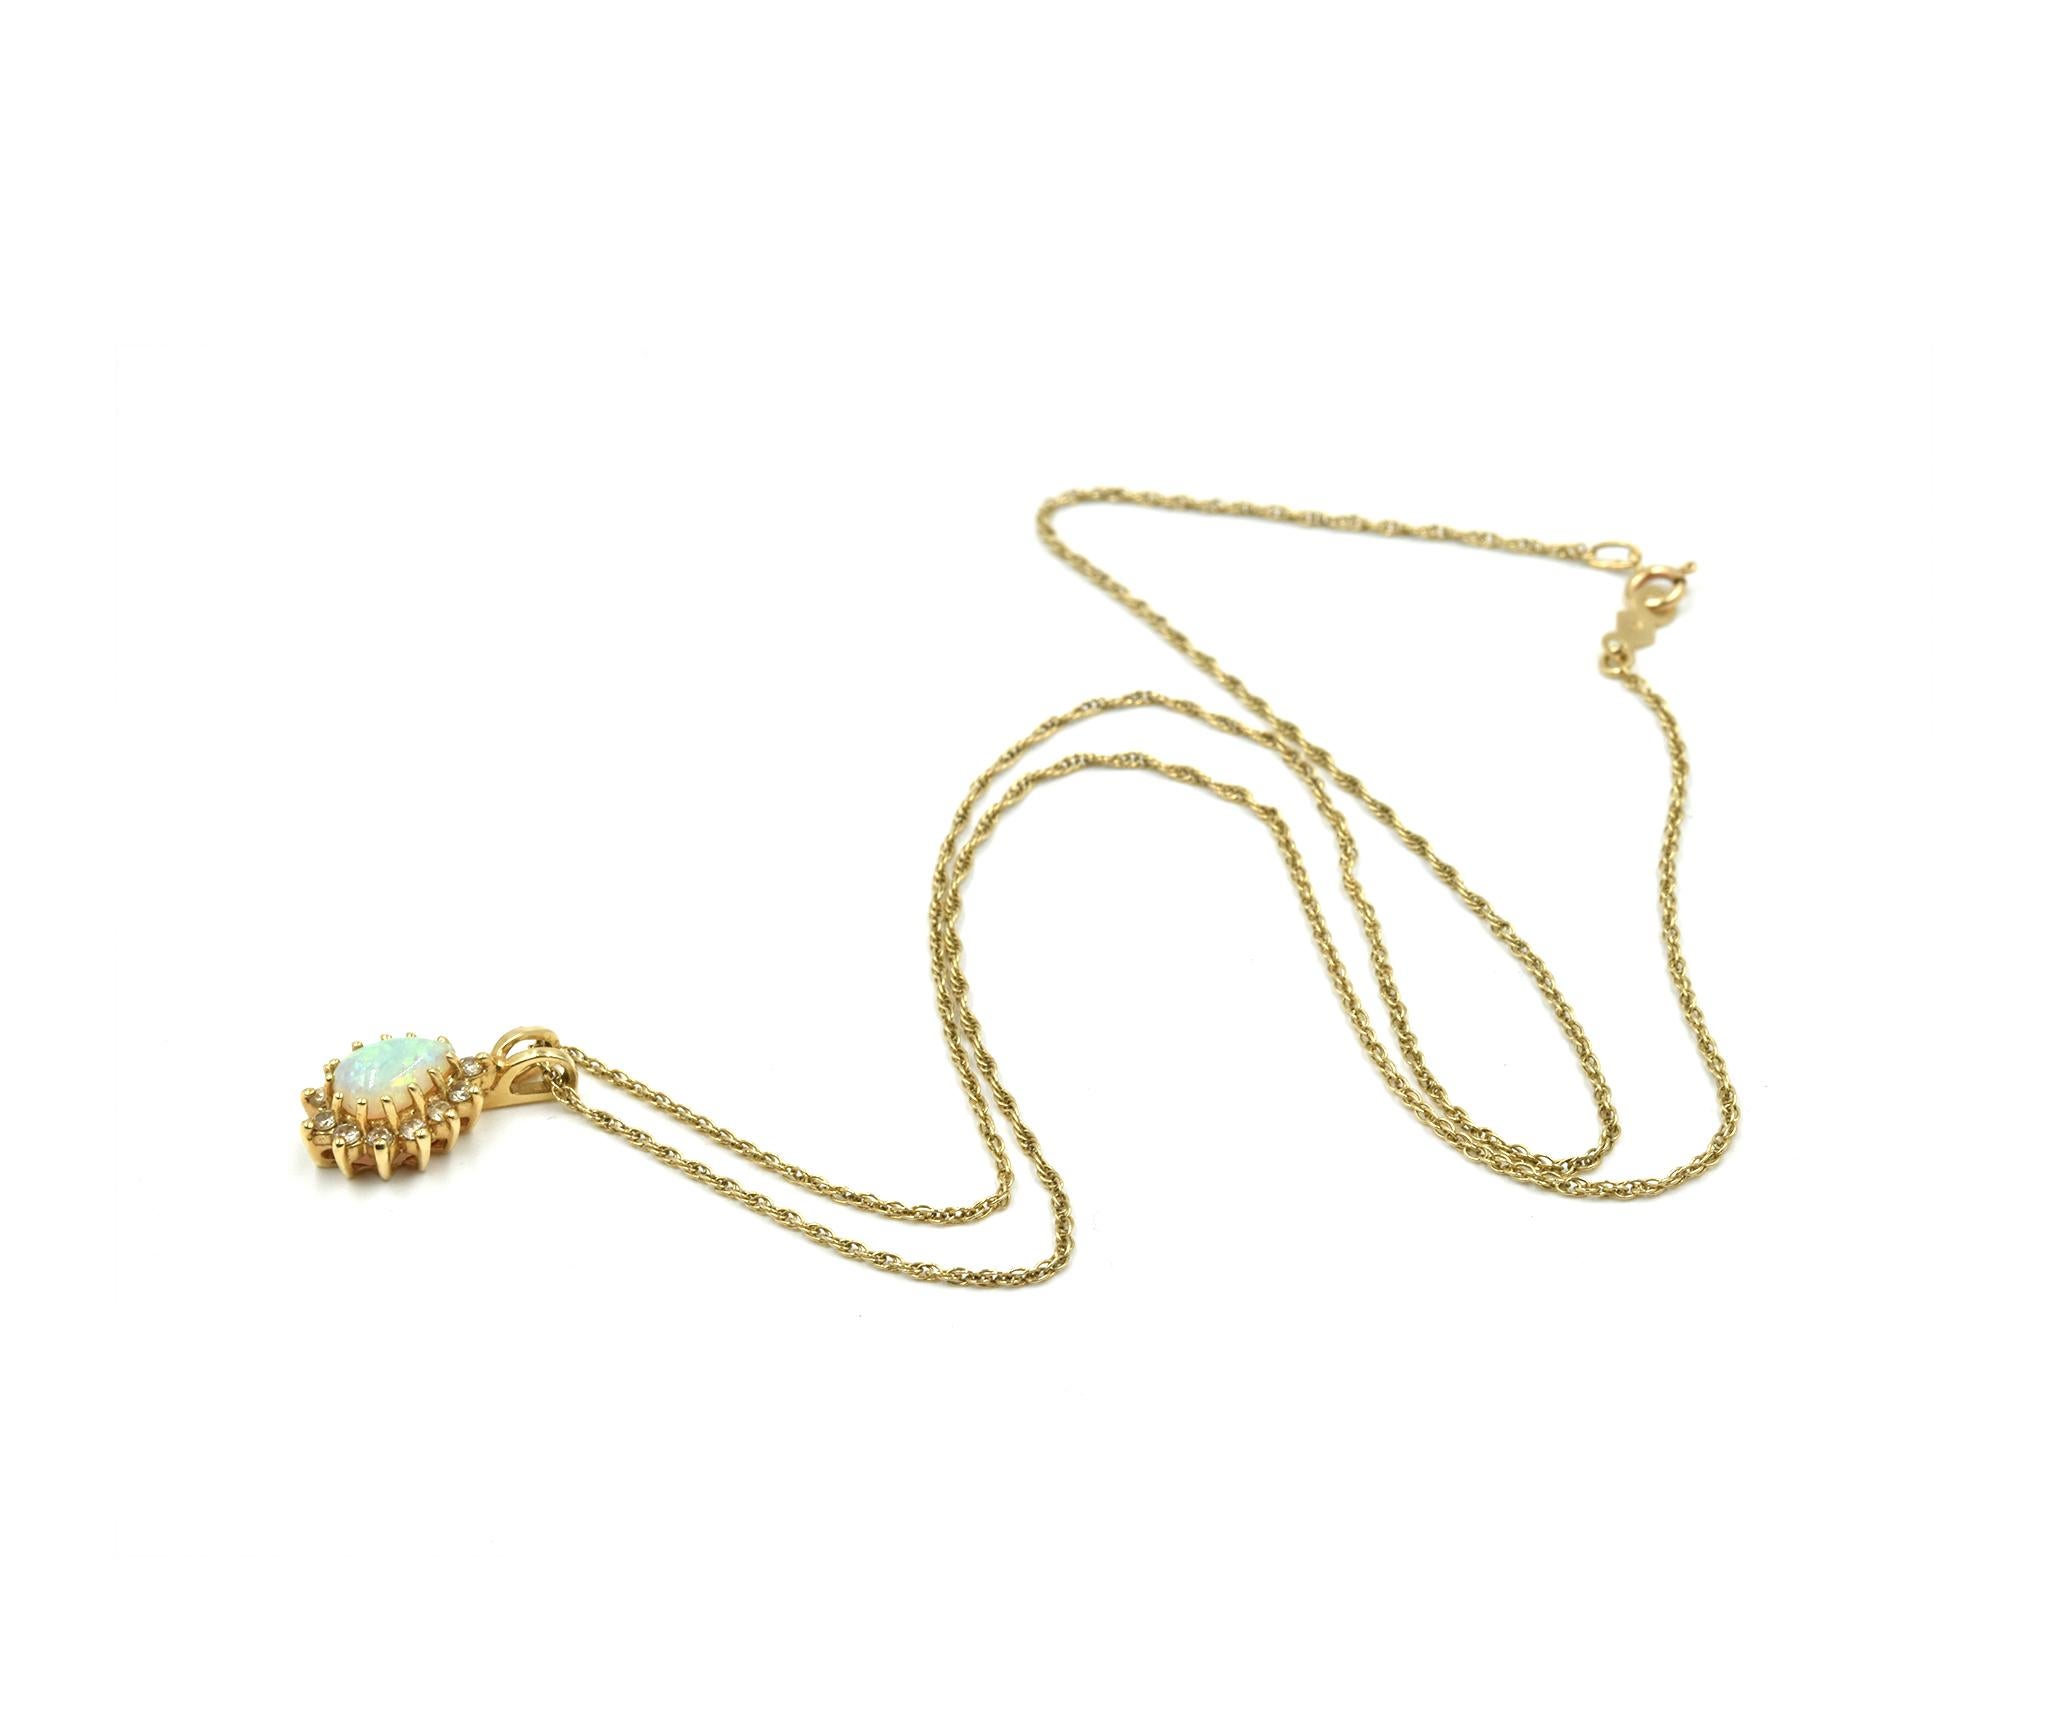 Designer: custom design
Material: 14k yellow gold
Gemstone: cabochon mystic opal gemstone
Diamonds: 12 round brilliant cut diamonds = 0.12 carat total weight
Dimensions: necklace measures 18 inches long
Weight: 2.29 grams
